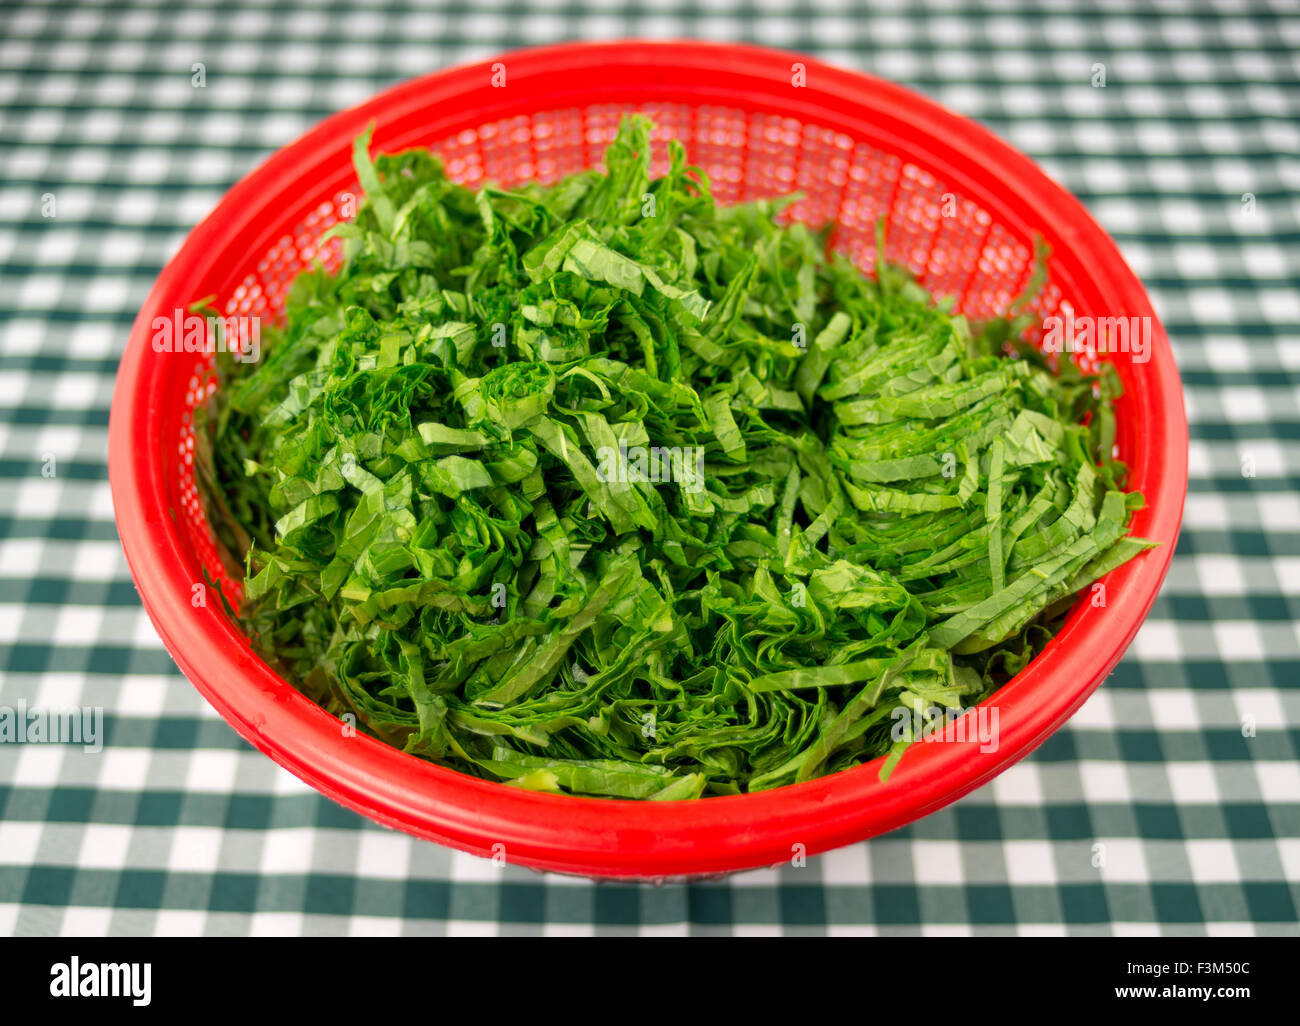 Freshly chopped raw mustard leaves in a red strainer bowl, against a green and white checkered tablecloth Stock Photo